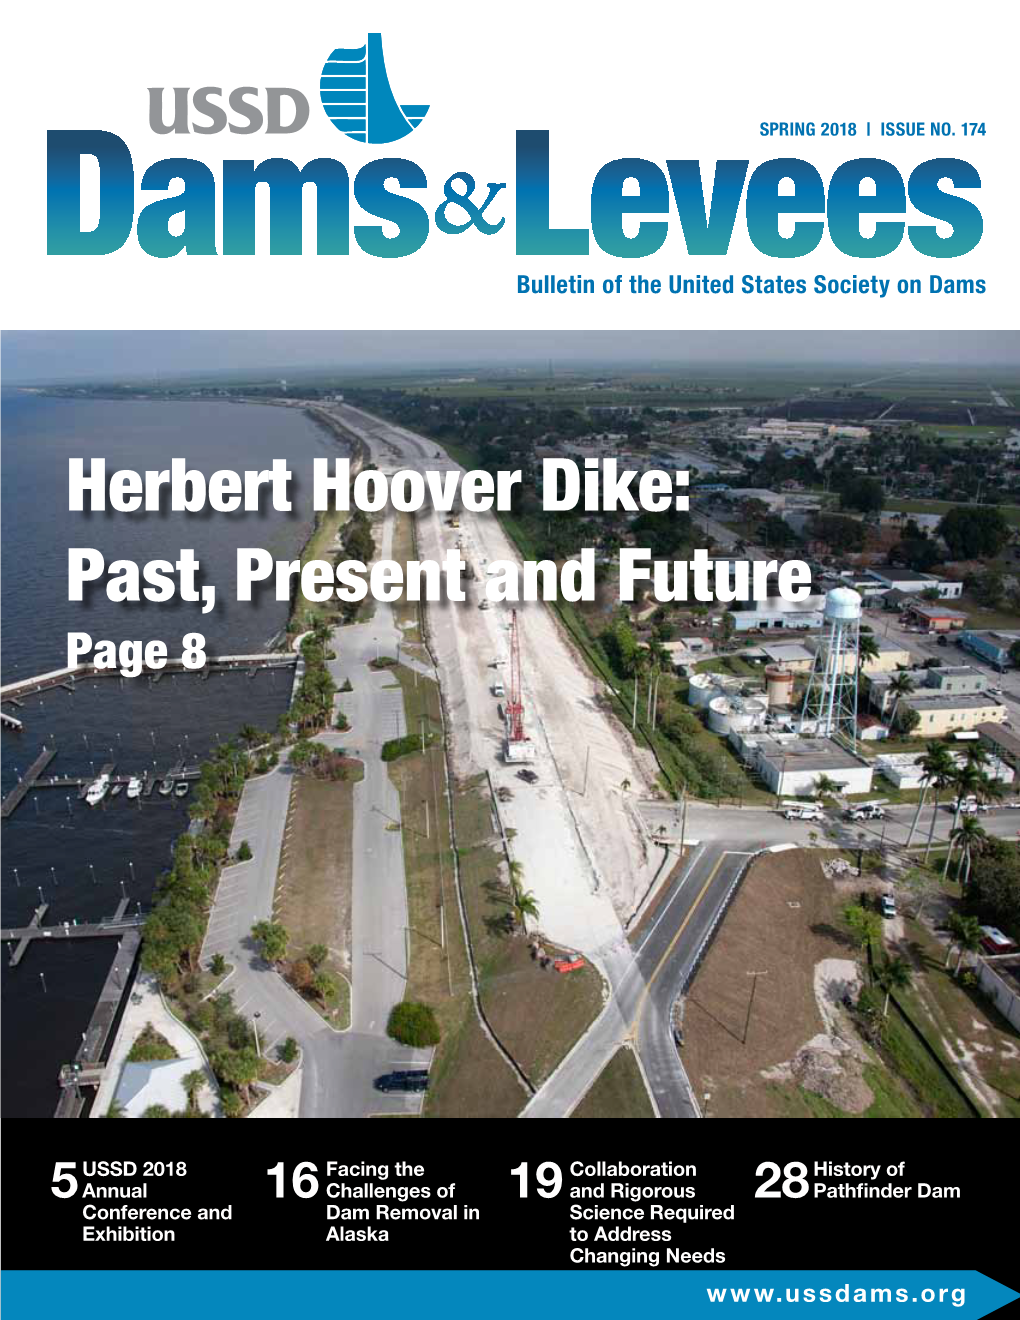 Herbert Hoover Dike: Past, Present and Future Page 8